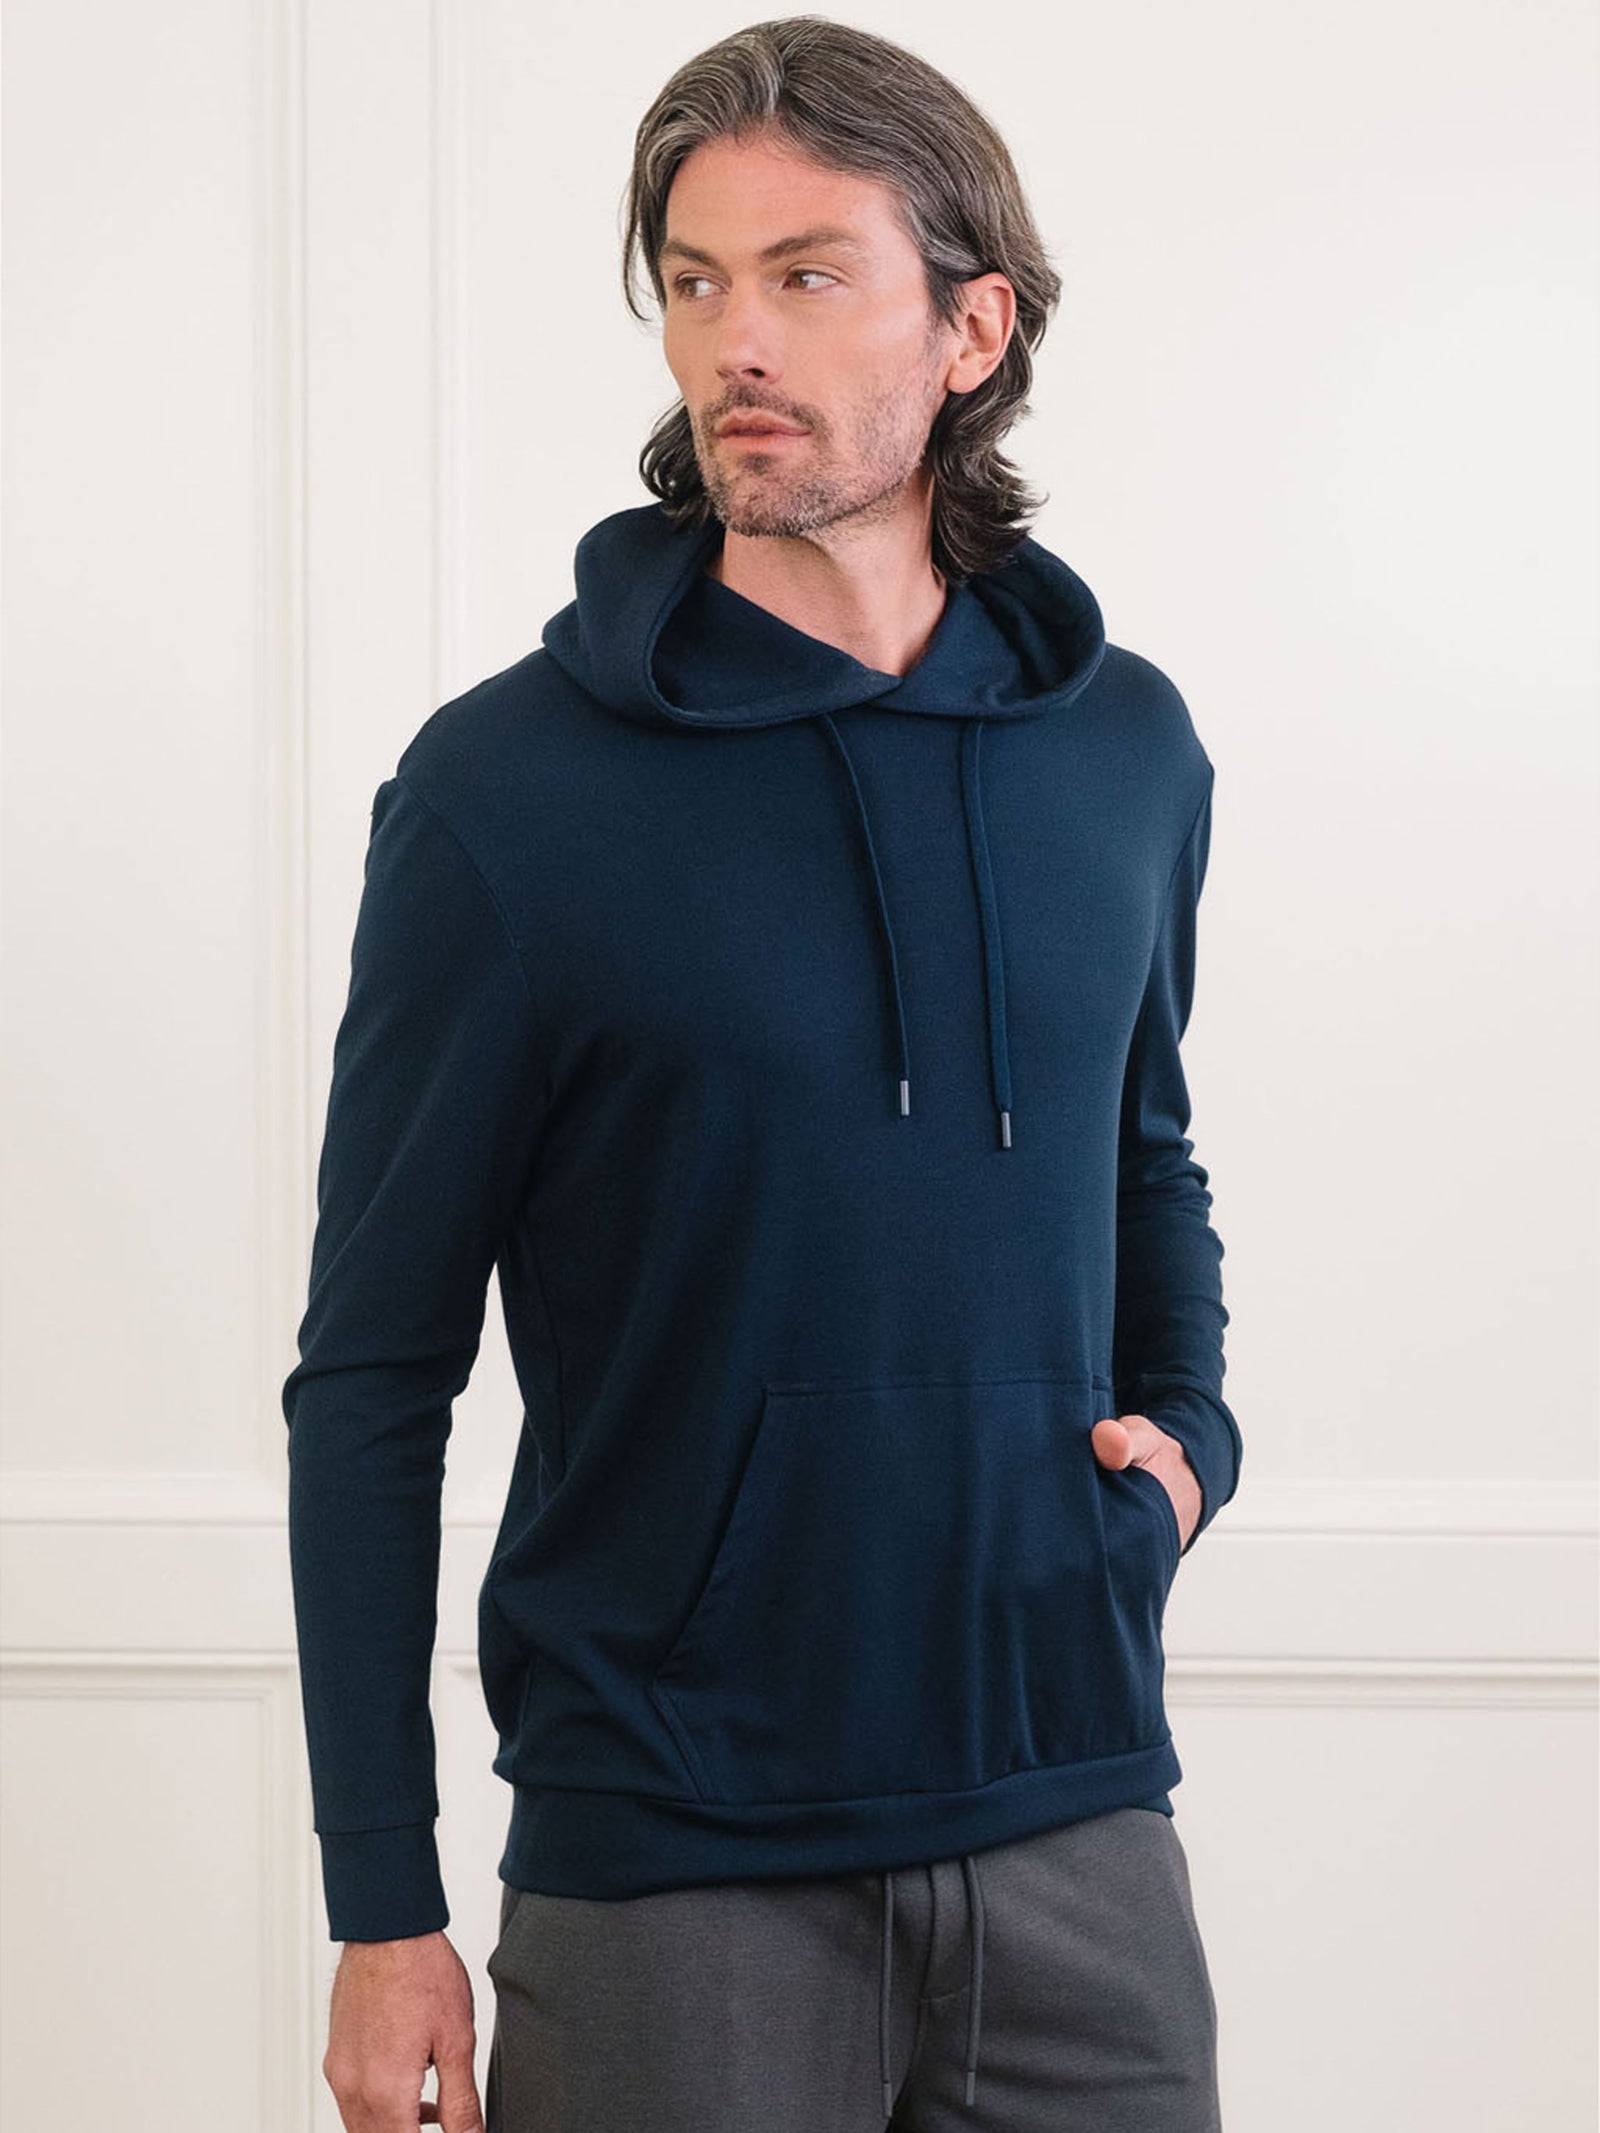 Navy Bamboo Hoodie worn by man standing in front of white background.